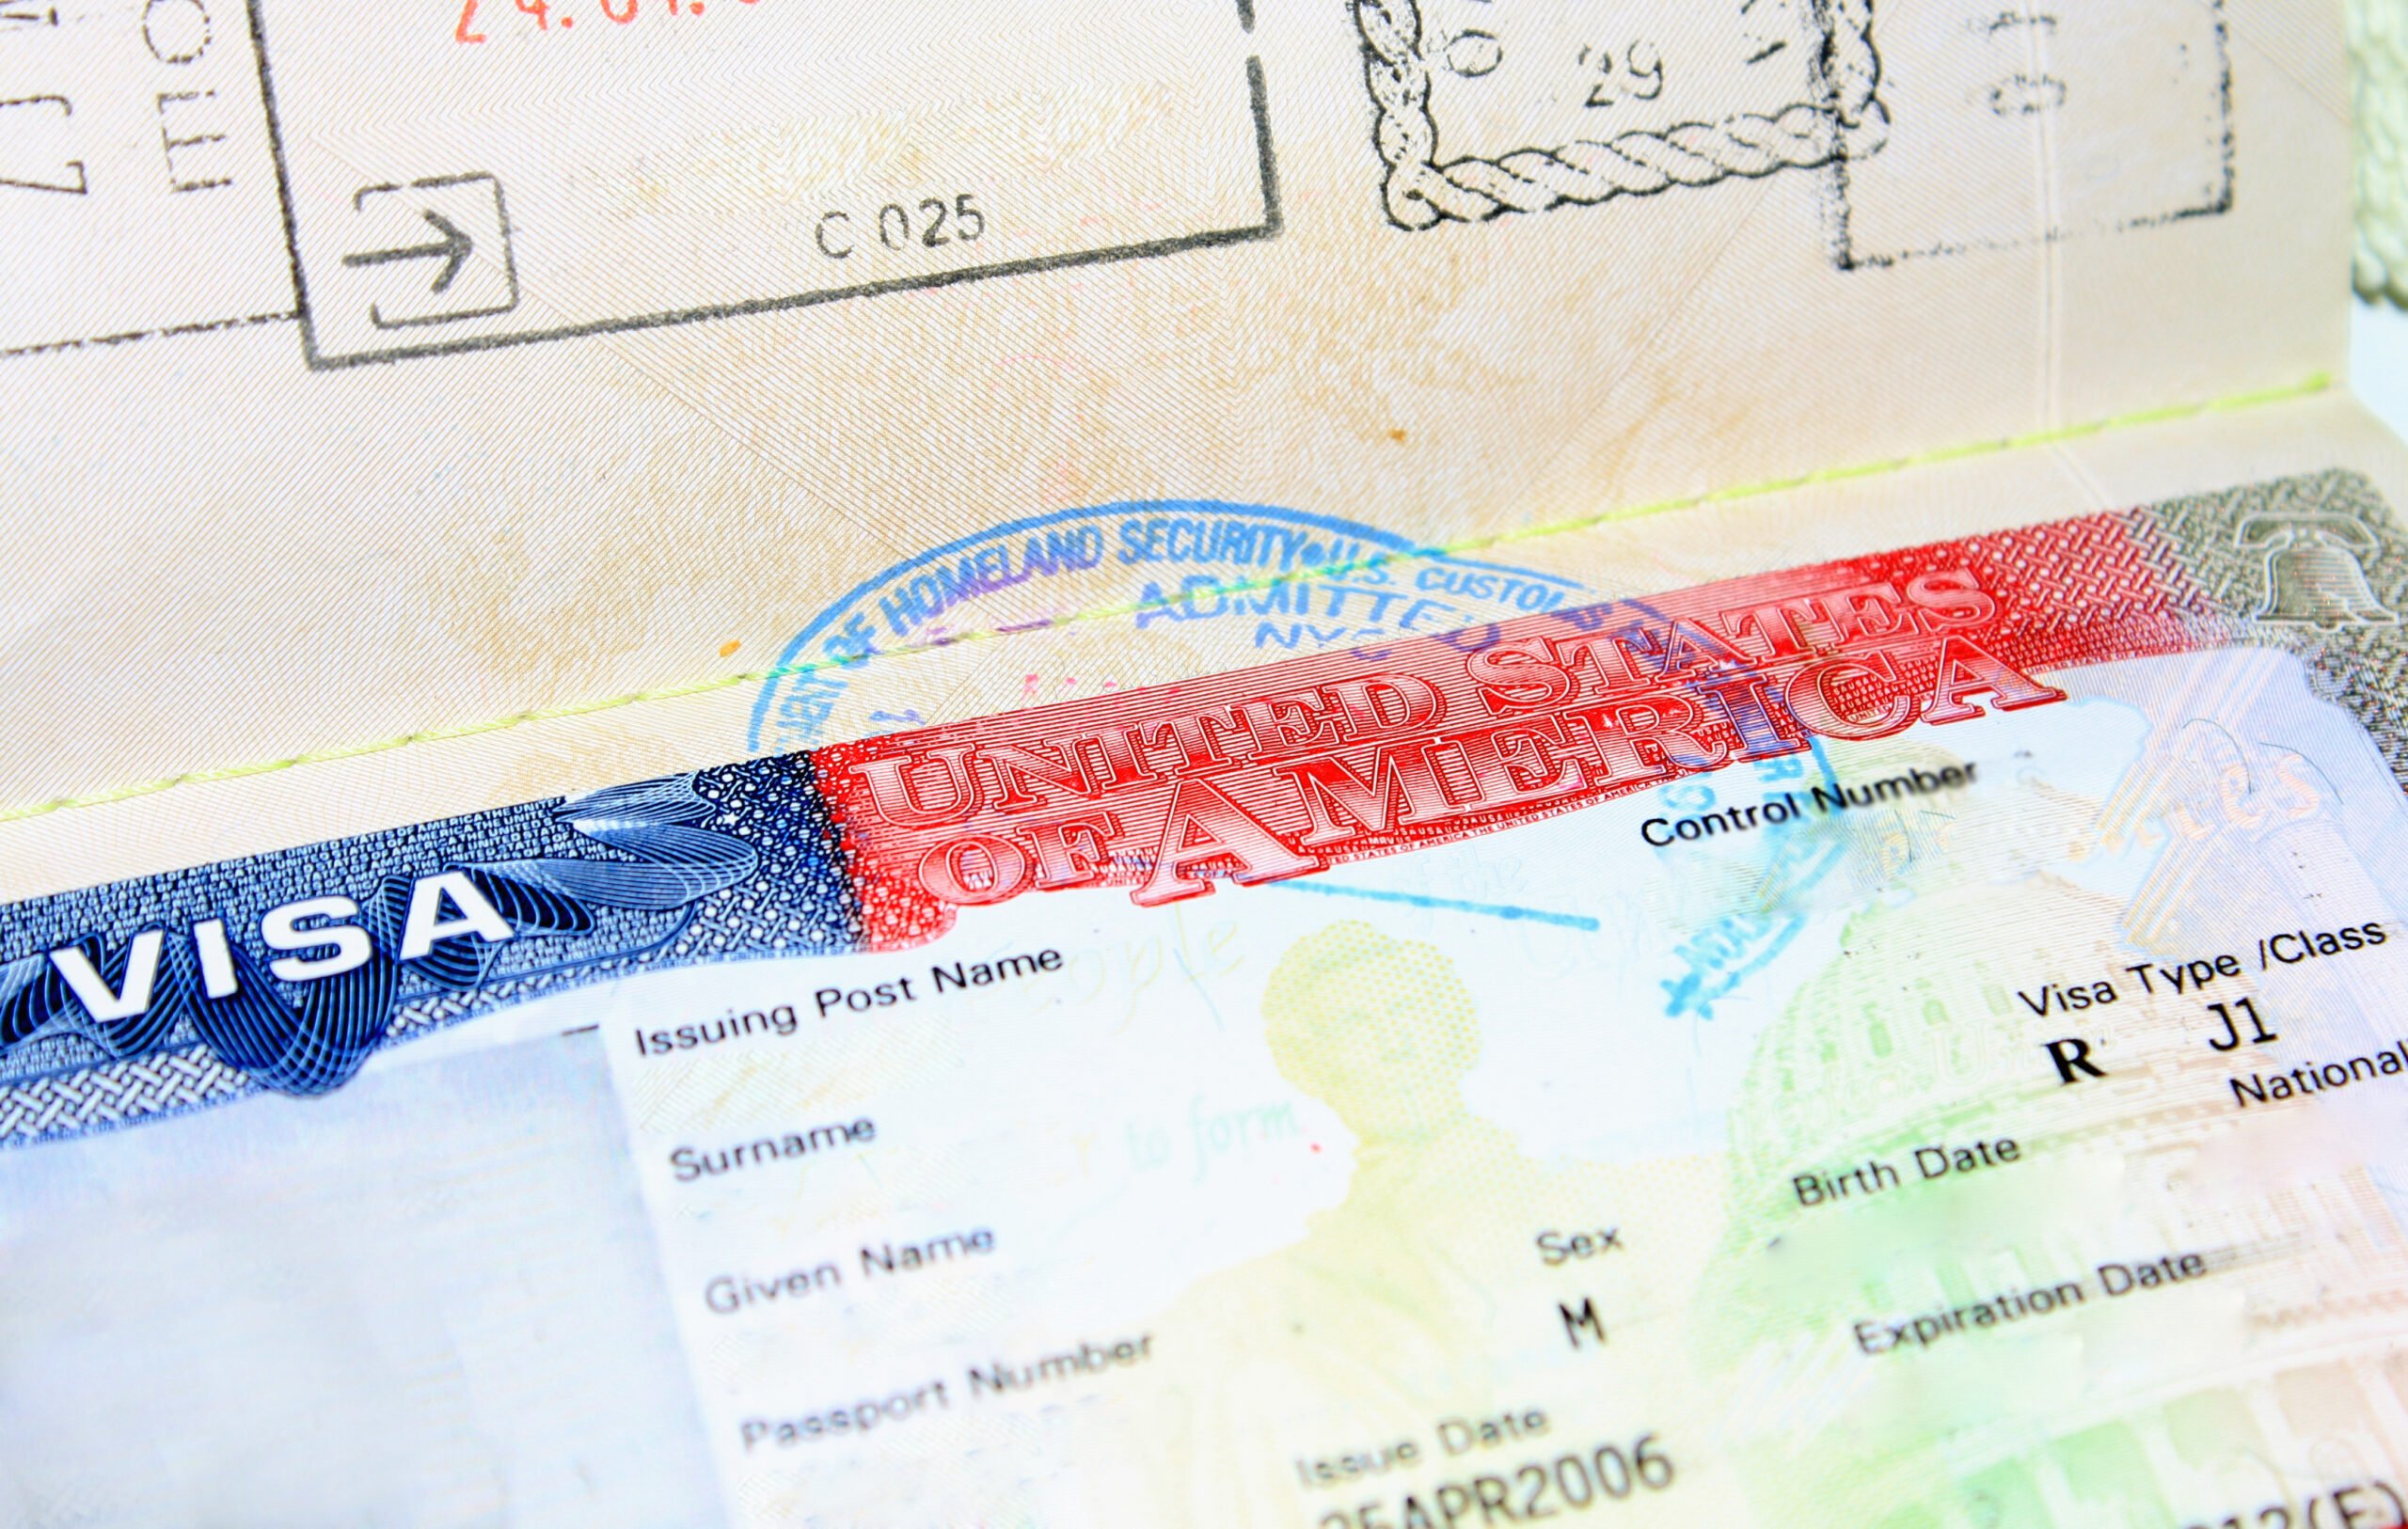 J1 Visa Lawyers News – Updated Policy on 2-Year Foreign Residence Requirement